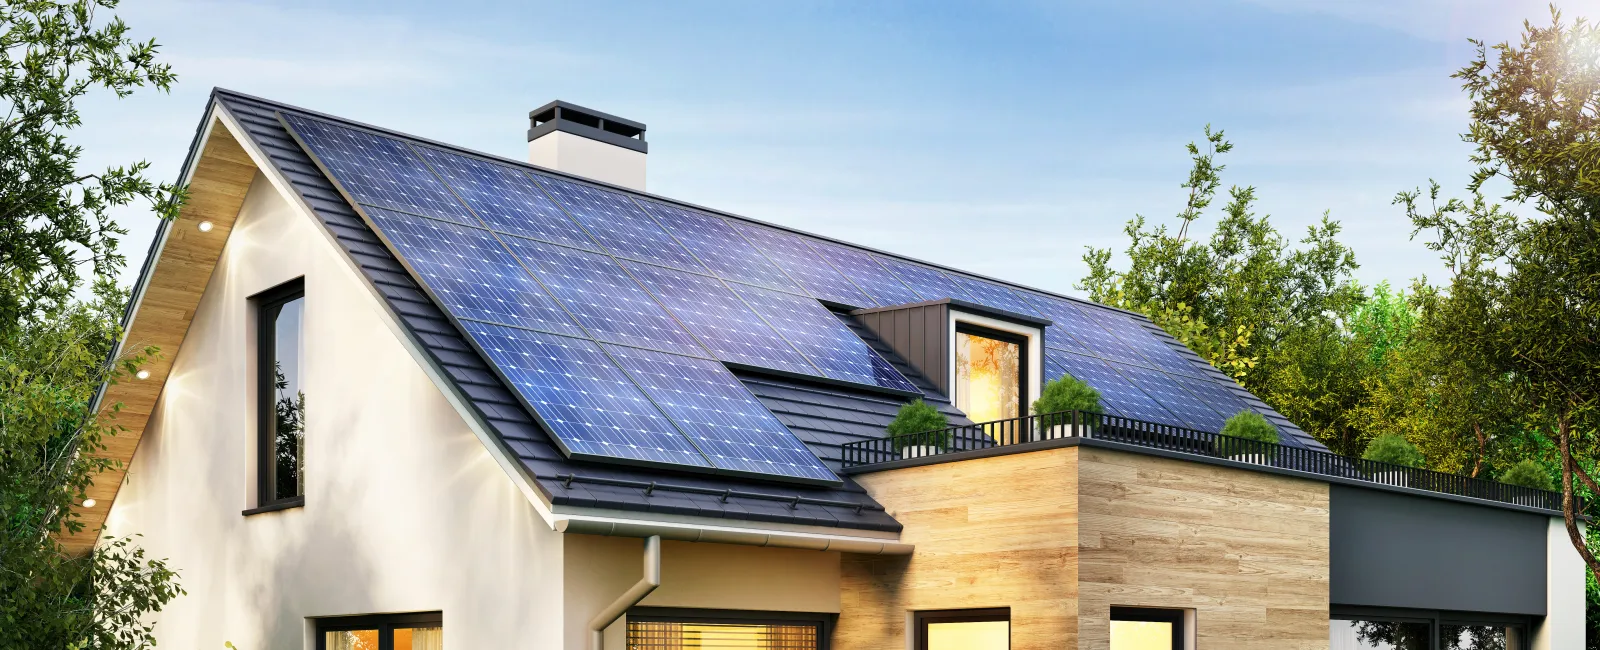 Cool Roofs for Net Zero Homes